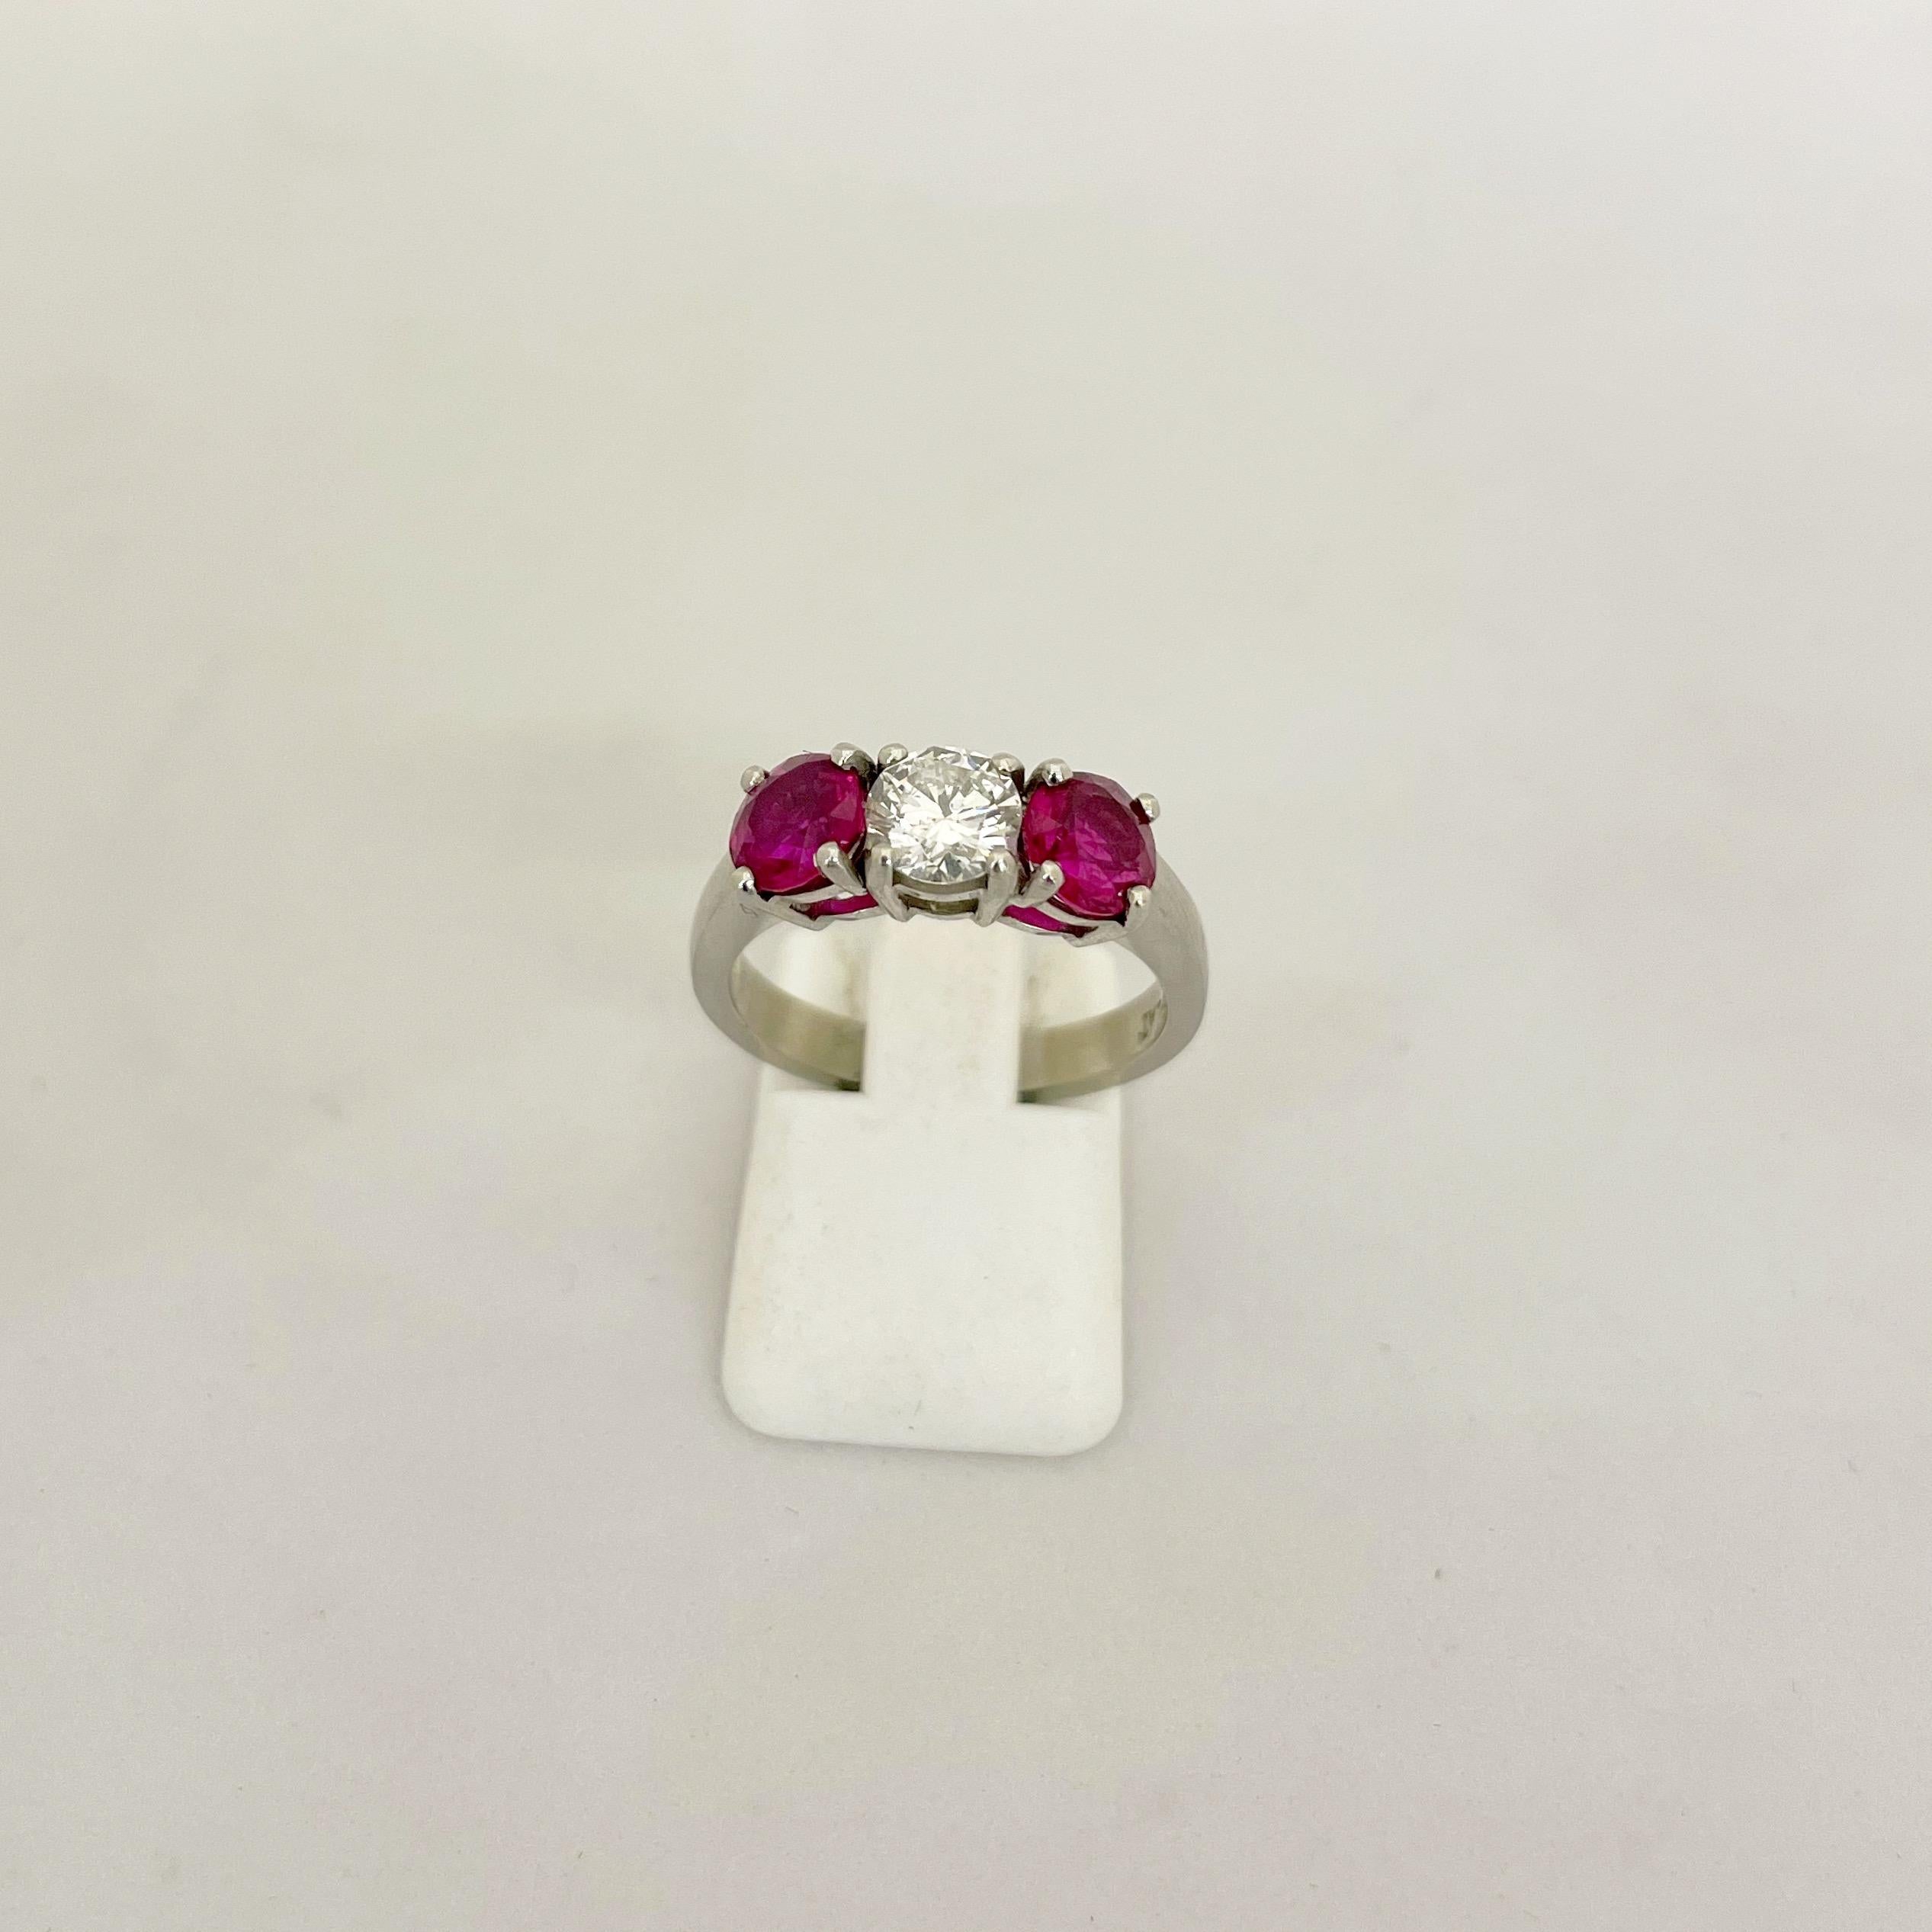 Platinum 3 Stone, 1.63 Carat Ruby and .61 Carat Diamond Ring For Sale 1